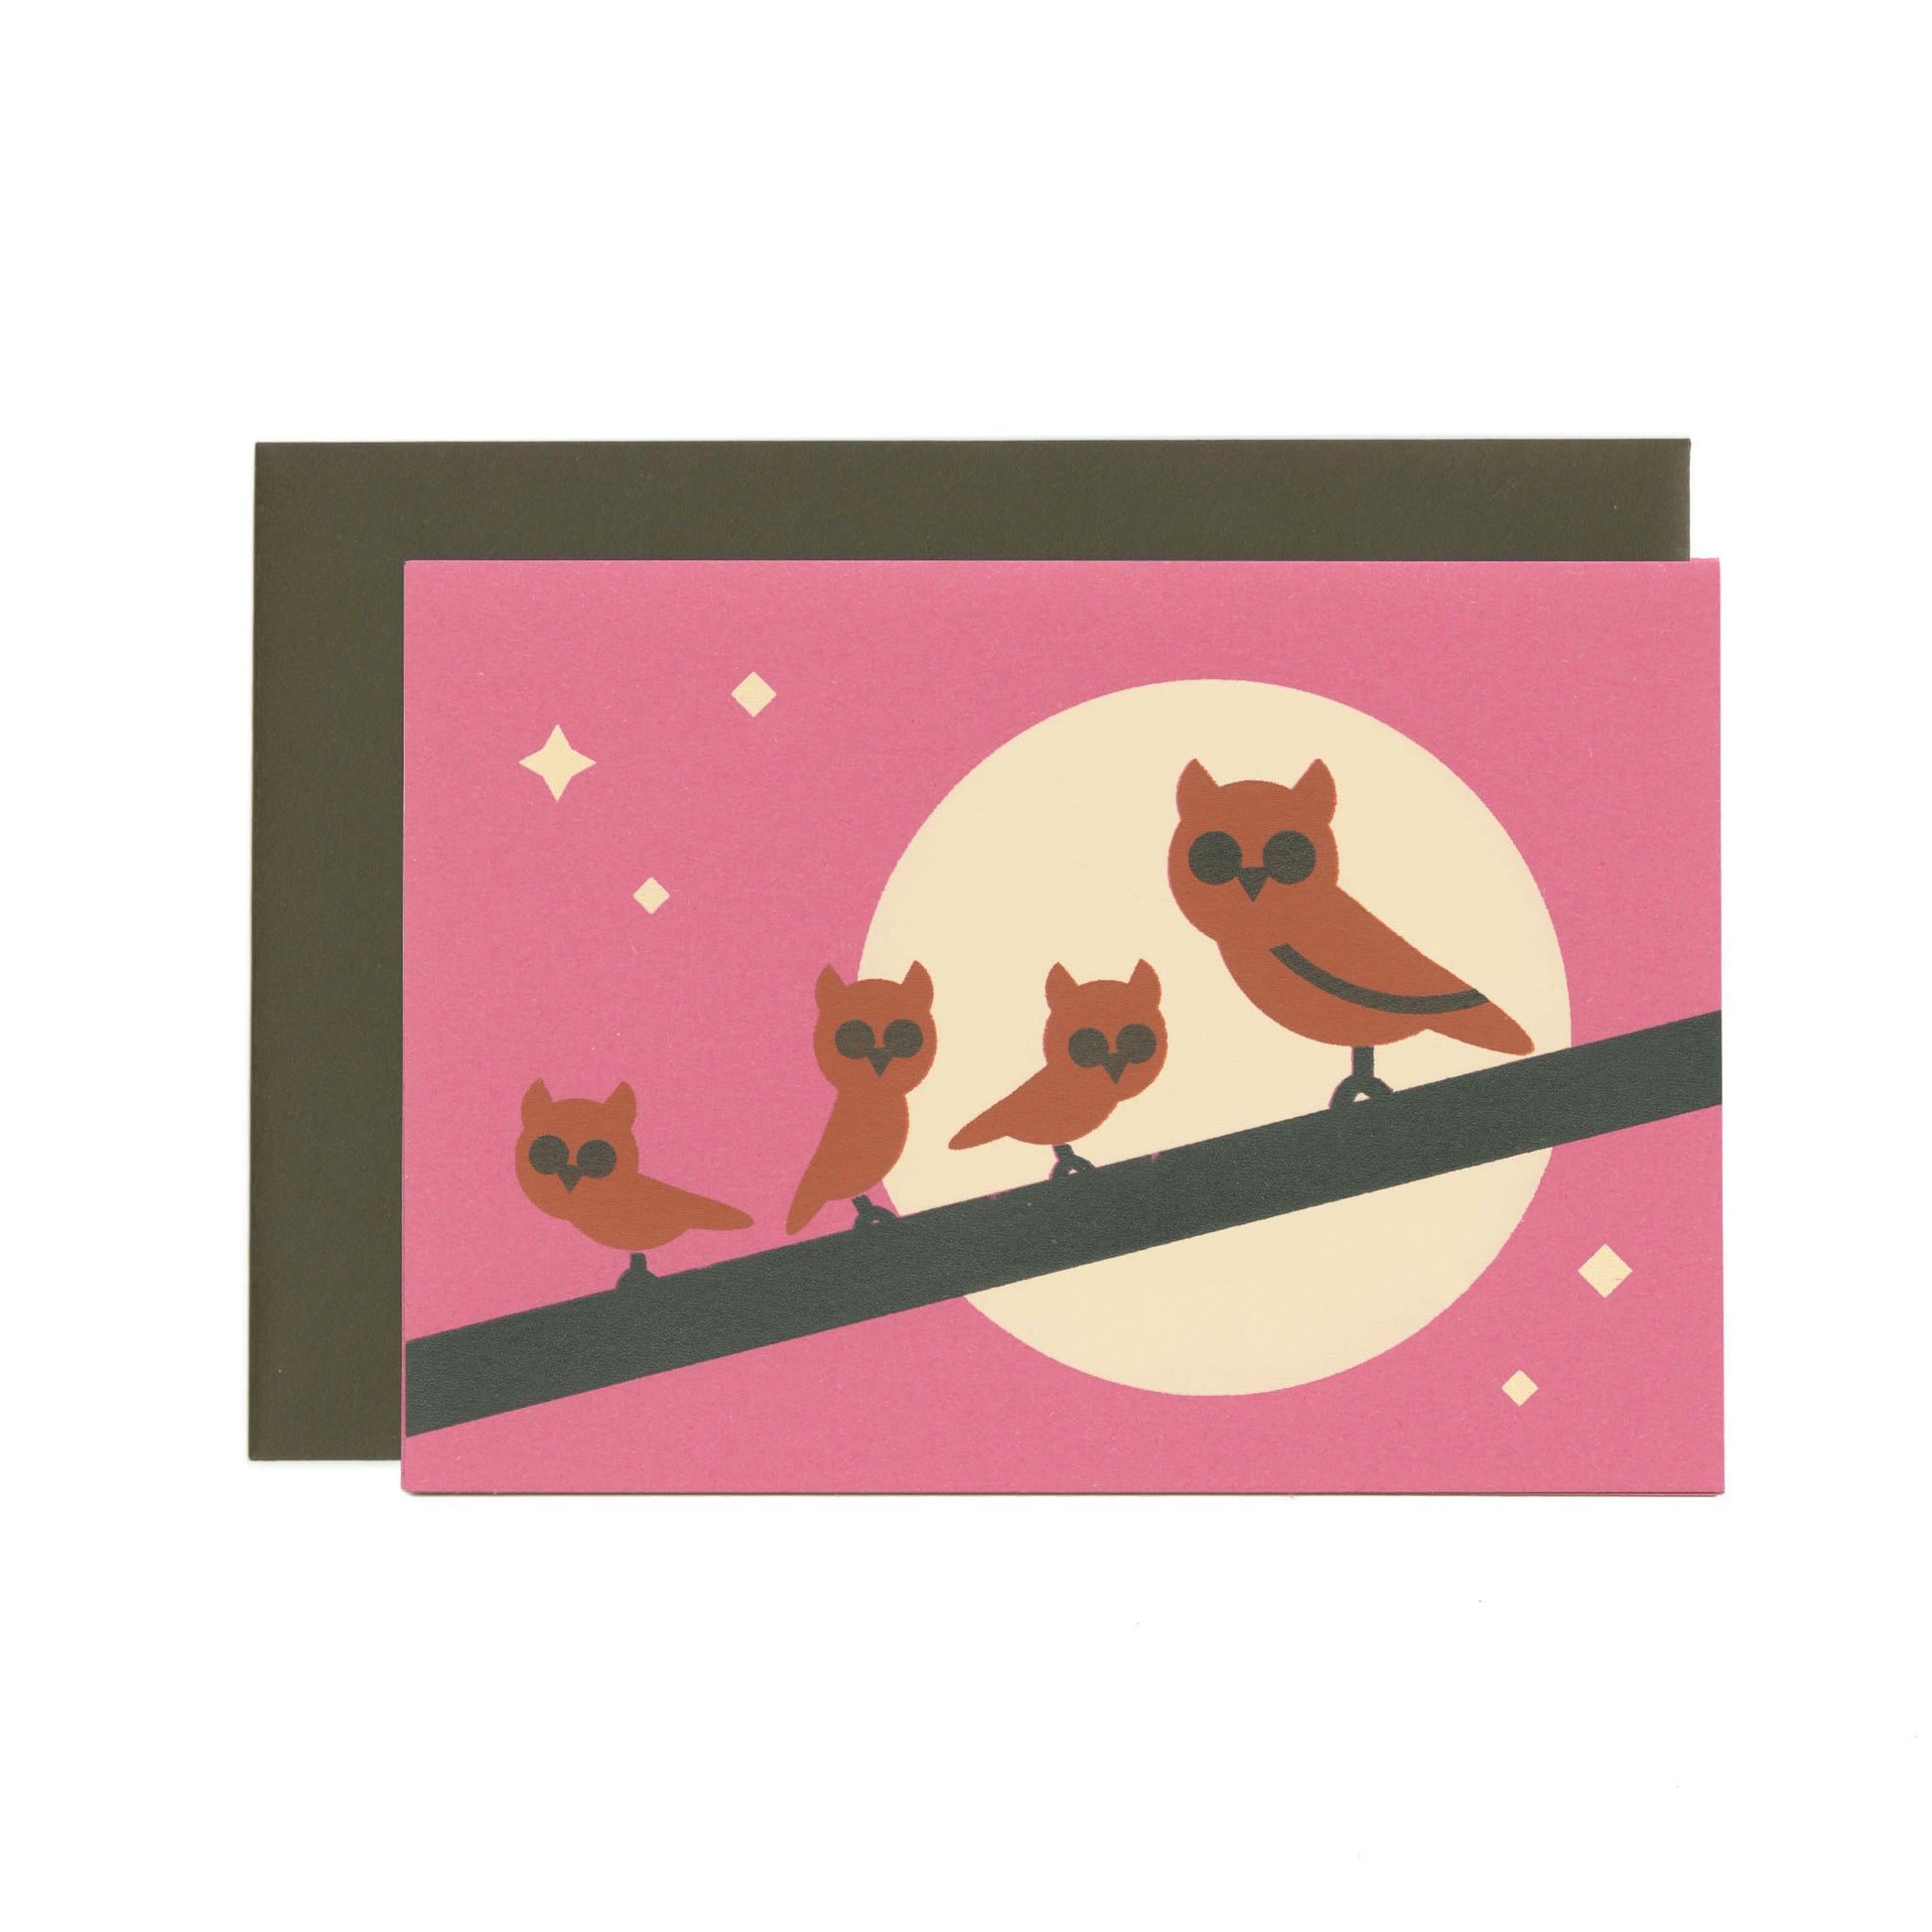 A magenta-purple greeting card with an illustration of one big and three small brown owls on a branch. In the background there is a moon and stars. Behind the card is a dark brown envelope.